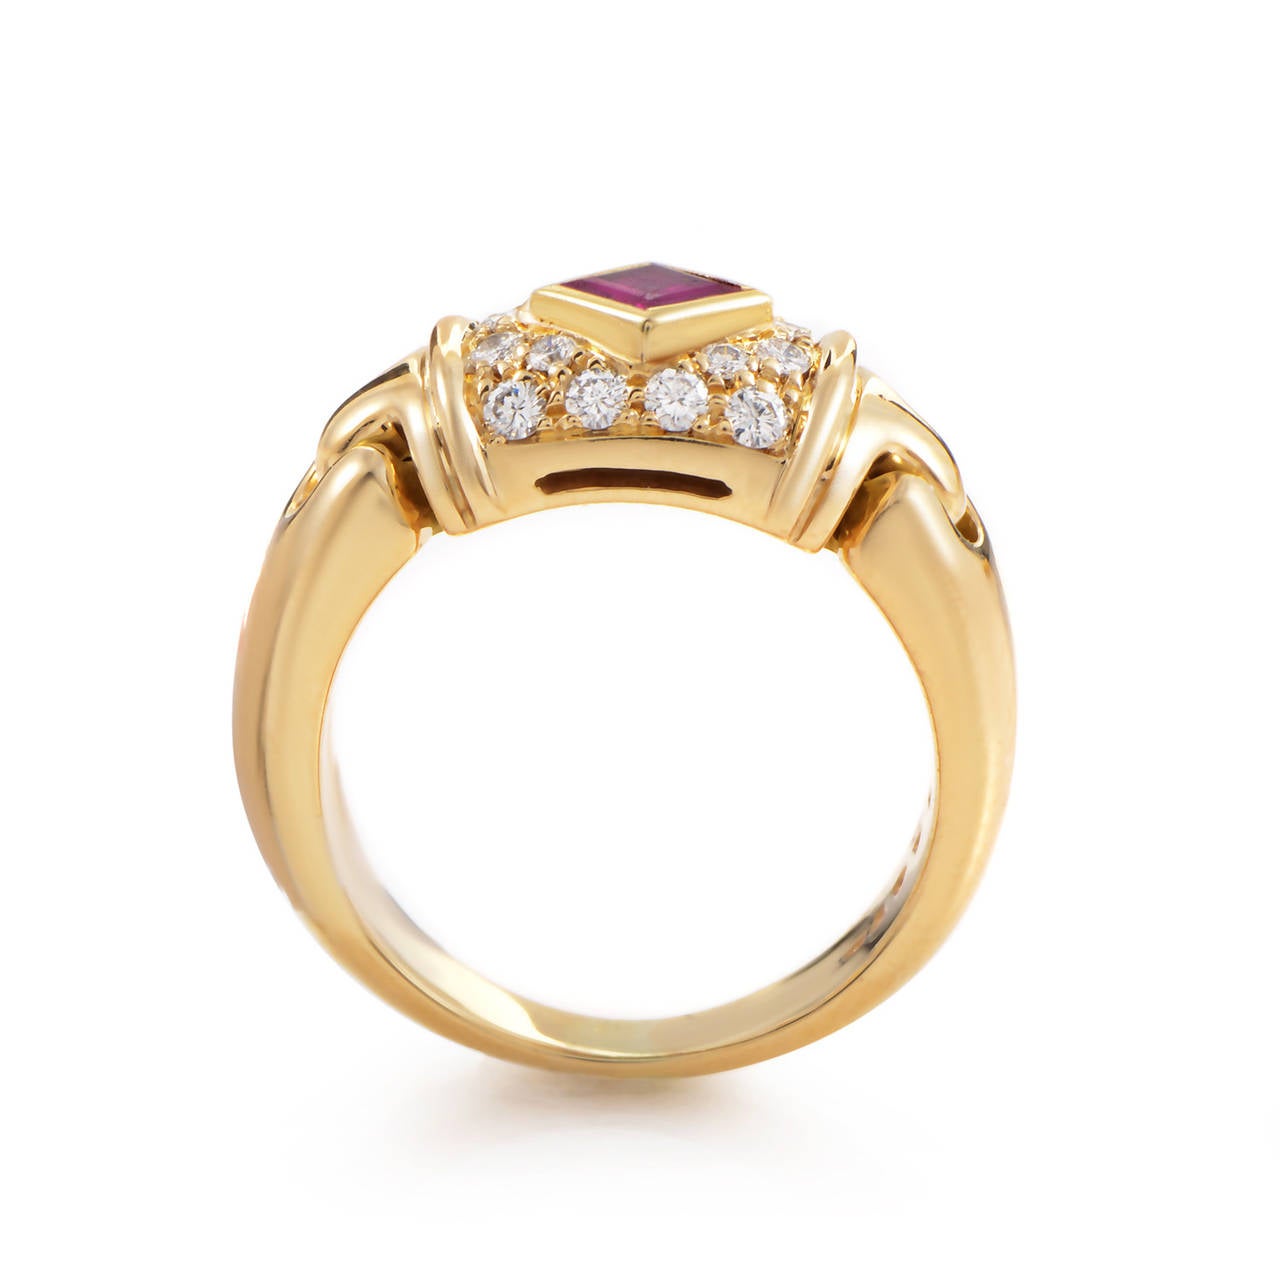 Take your fashion to the next level with this simple yet stylish Bulgari 18K yellow gold diamond ring. Adorned with 0.30 ct. of the most dazzling diamonds and a singular ruby, this ring will make you stand out in the crowd.

Included Items: